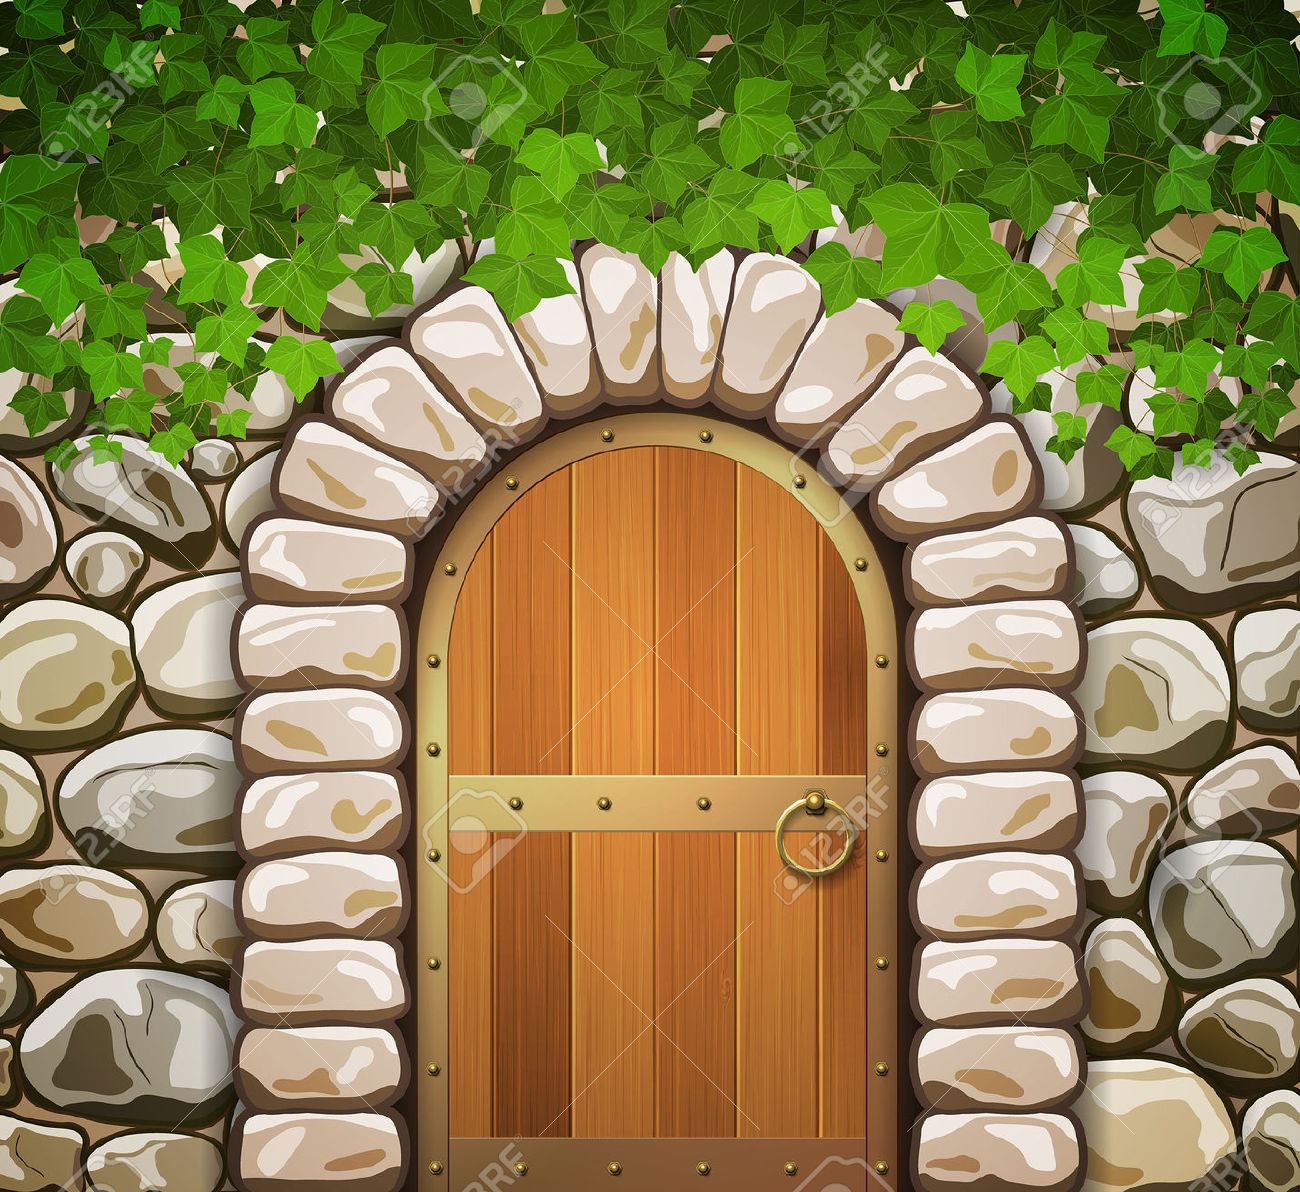 Arched door clipart - Clipground